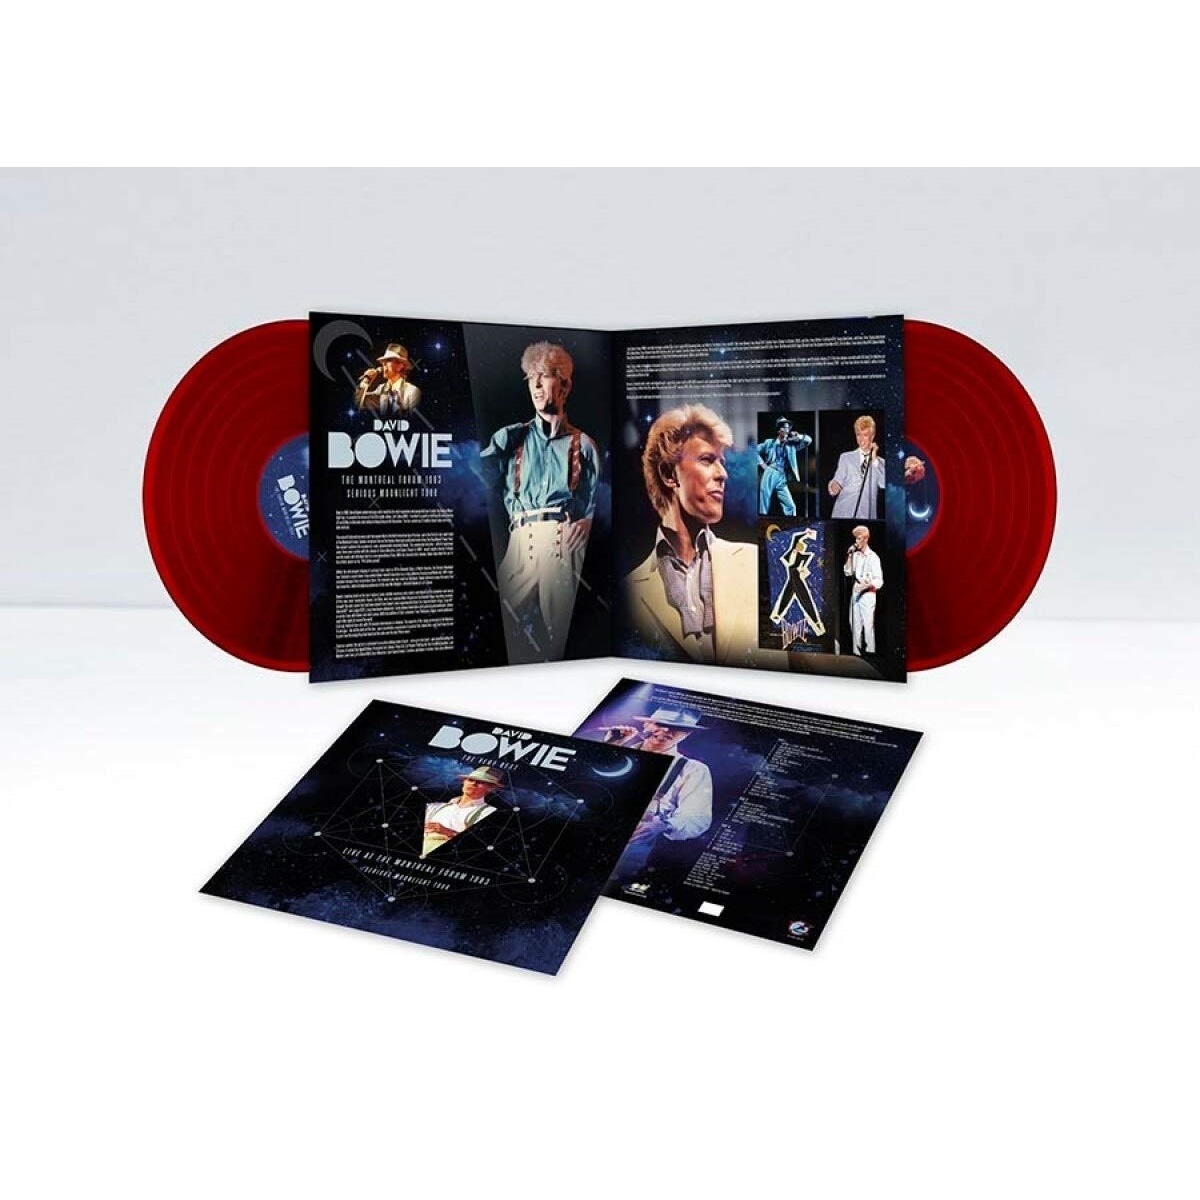 David Bowie (데이빗 보위) - The Very Best : Live At The Montreal Forum 1983 (Serious Moonlight Tour) [다크 레드 컬러 2LP] 